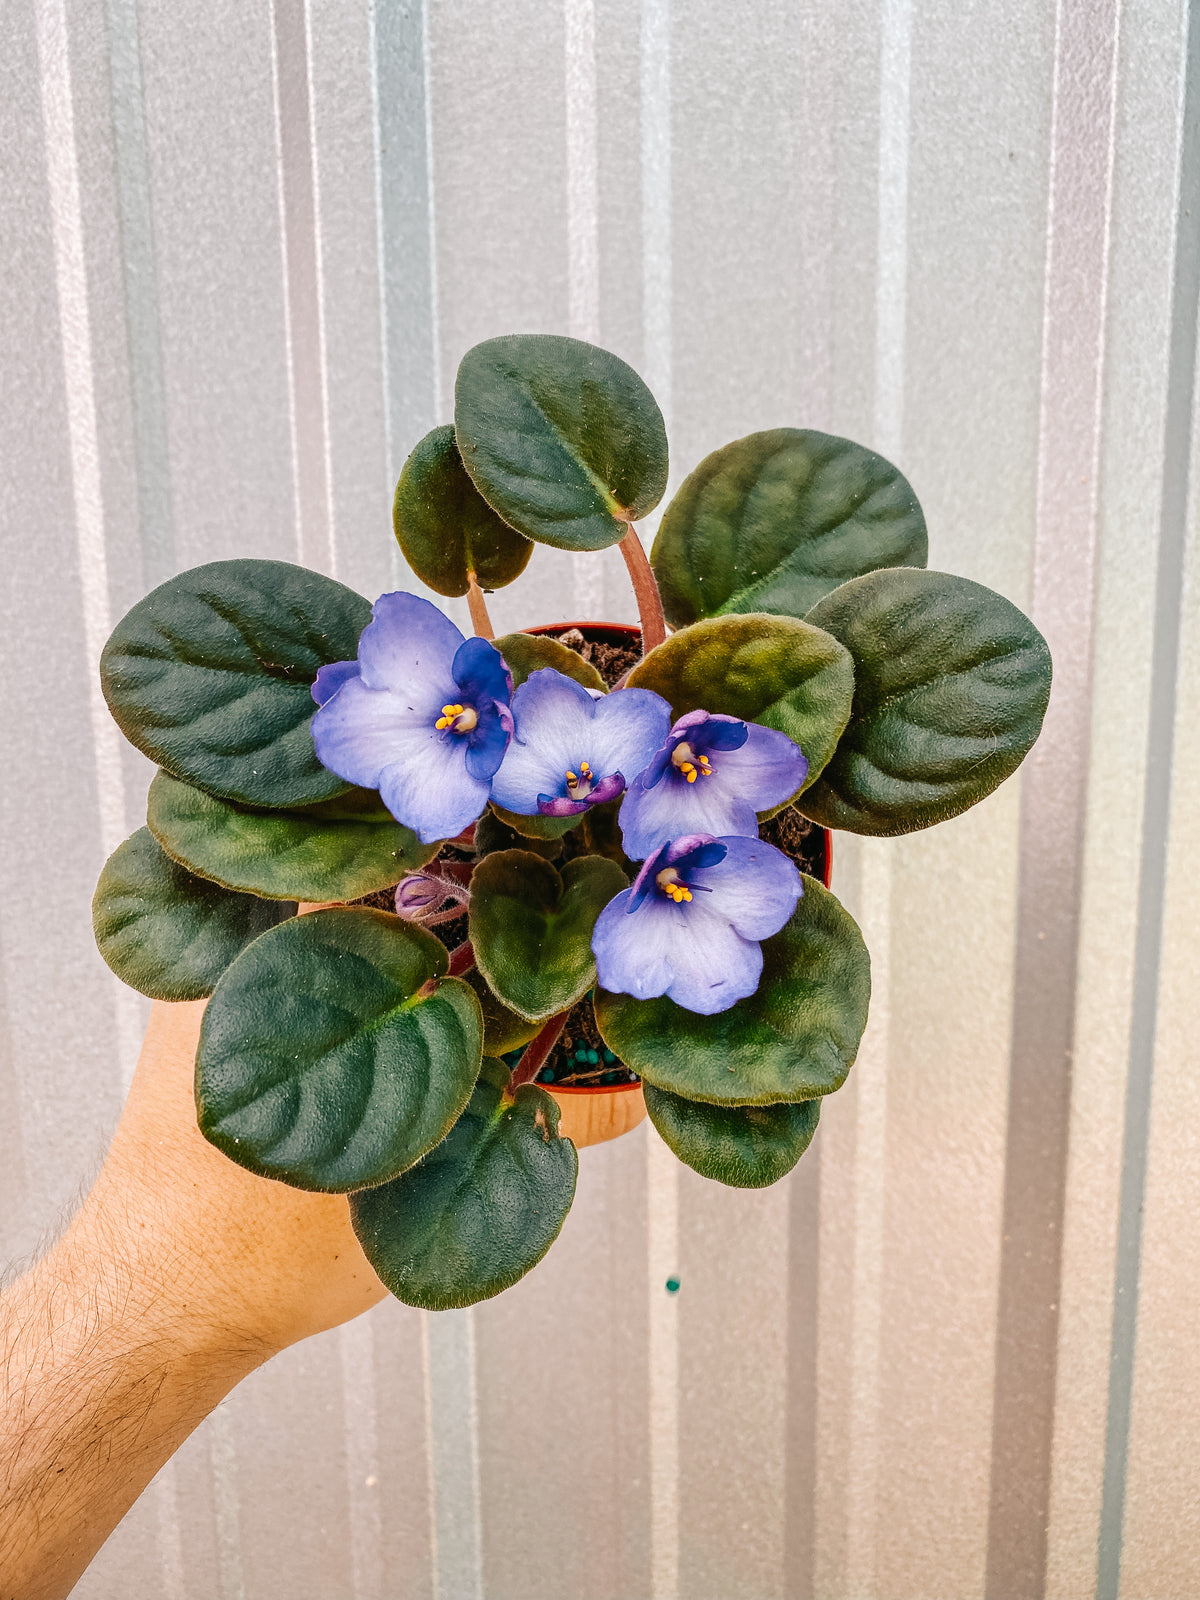 4" African Violet 'Mardi Gras Madness'